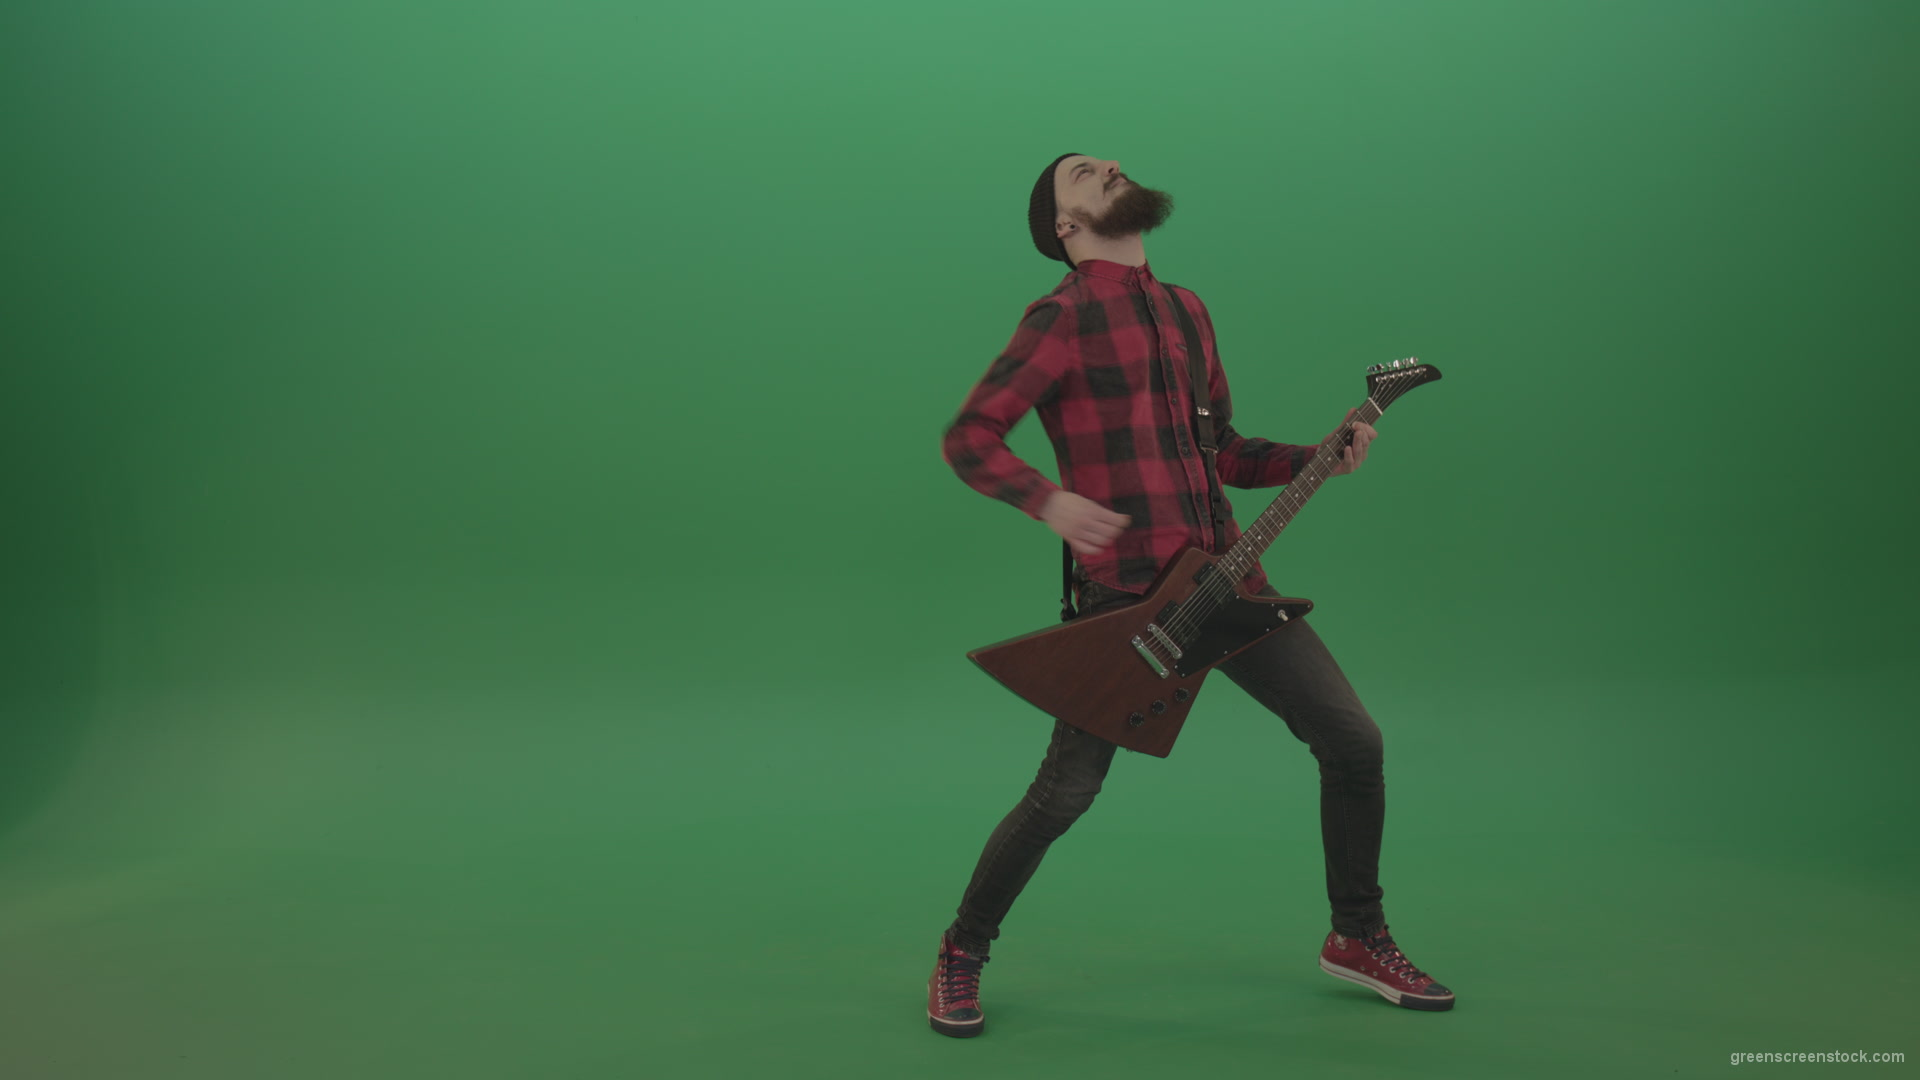 Punk-rock-full-size-man-guitarist-play-guitar-with-emotions-on-green-screen_004 Green Screen Stock